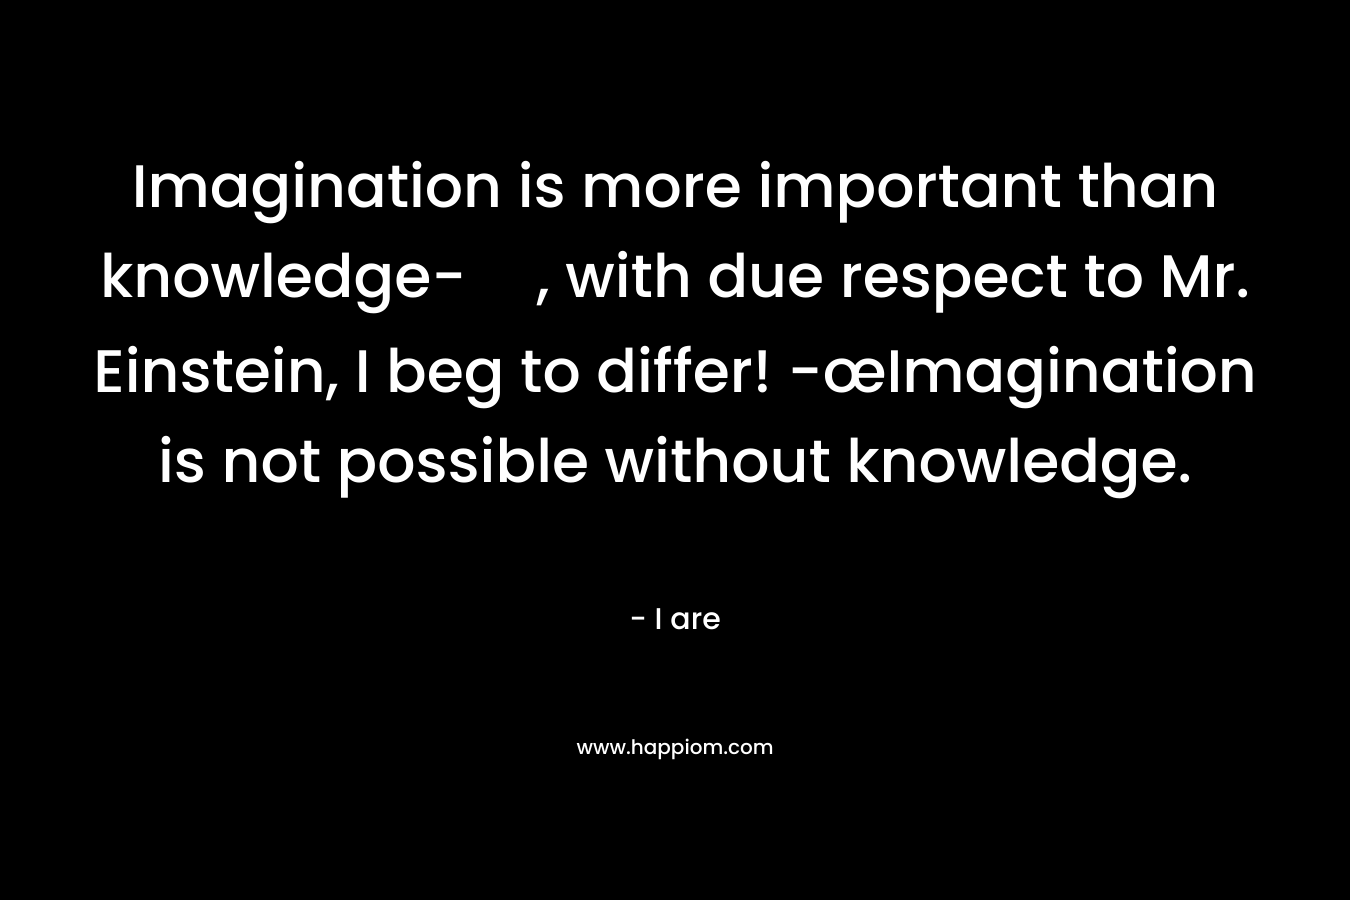 Imagination is more important than knowledge-, with due respect to Mr. Einstein, I beg to differ! -œImagination is not possible without knowledge. – I are